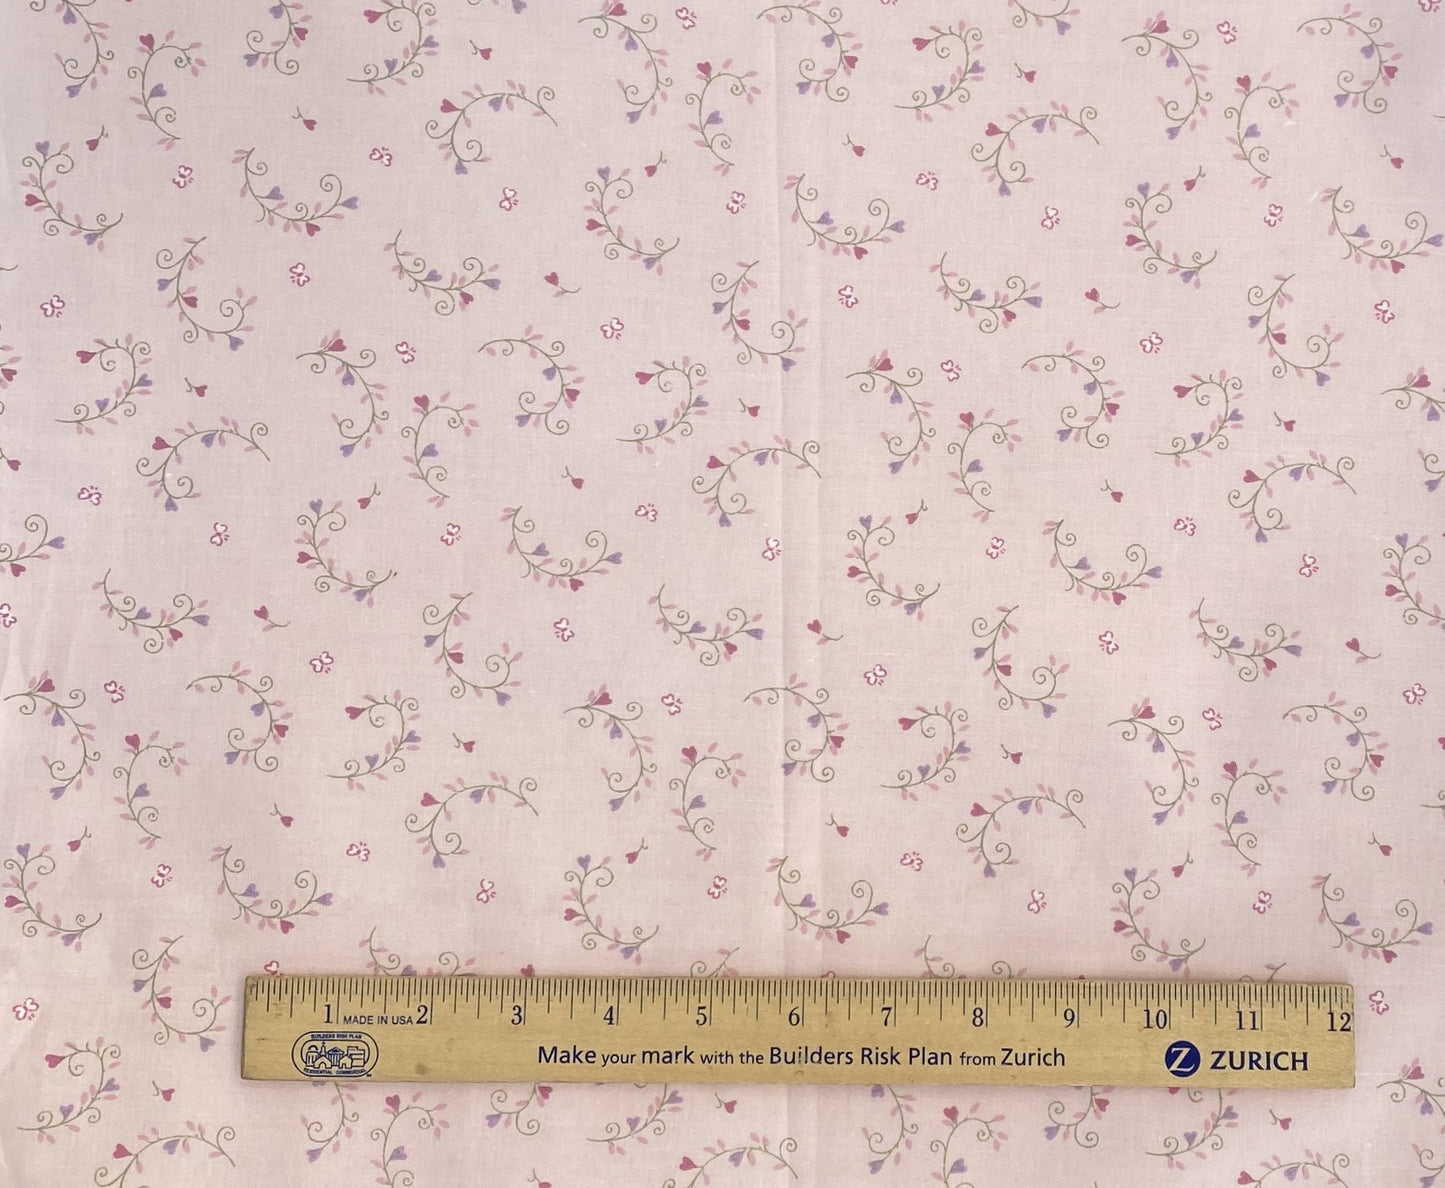 EOB - Light Pink Fabric / Dark Pink and Periwinkle Heart "Flower" / Light Pink Leaves / Green Vines